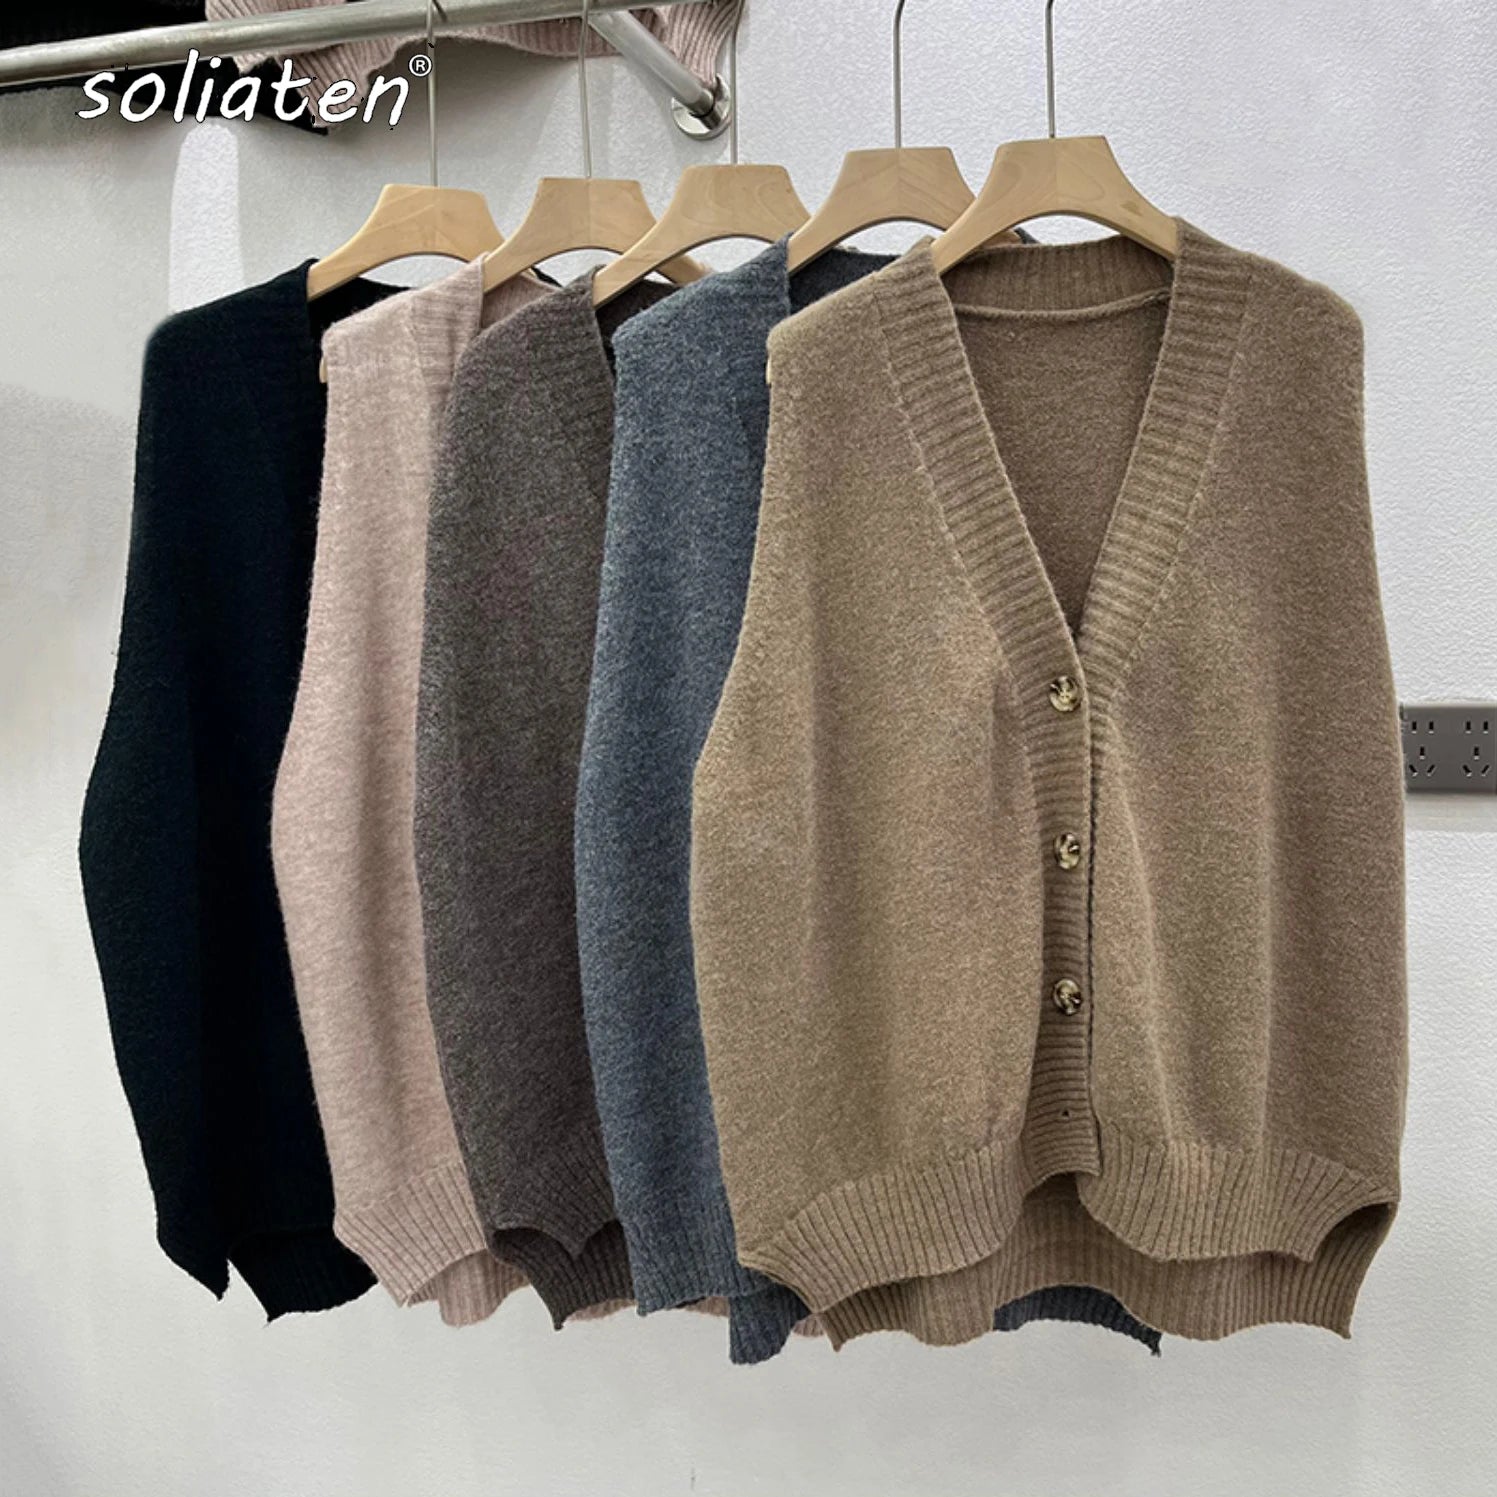 Solid Color Classic Cardigan Vest Women's V-Neck Sleeveless Waistcoat Maternity Knitwear Pregnant's Top Great Quality C-179